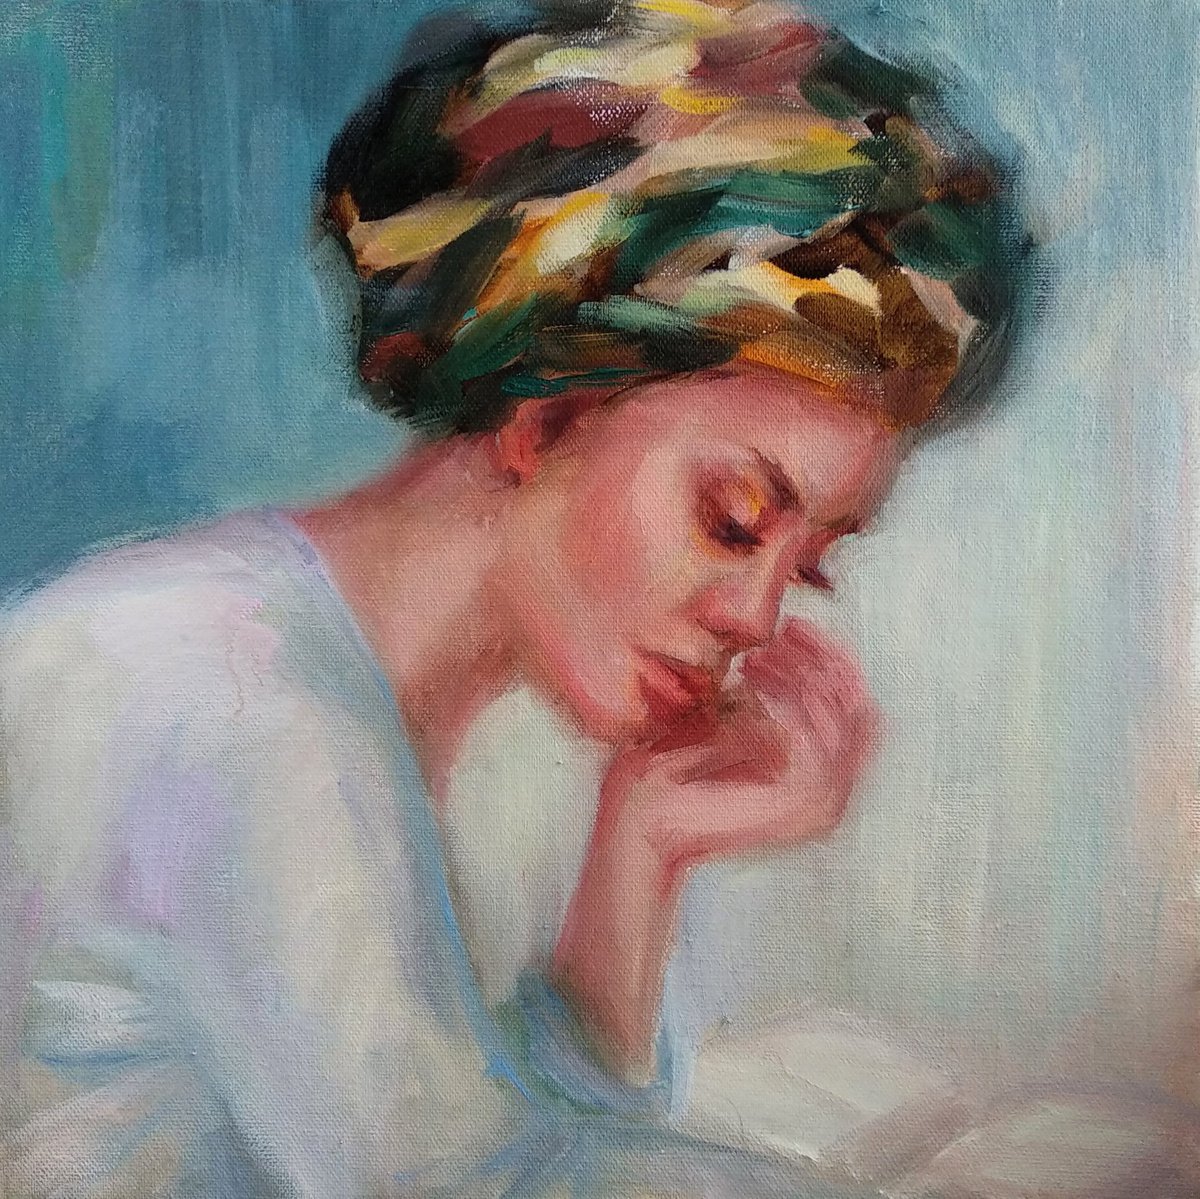 Woman Portrait Reading a Book by Anastasia Art Line